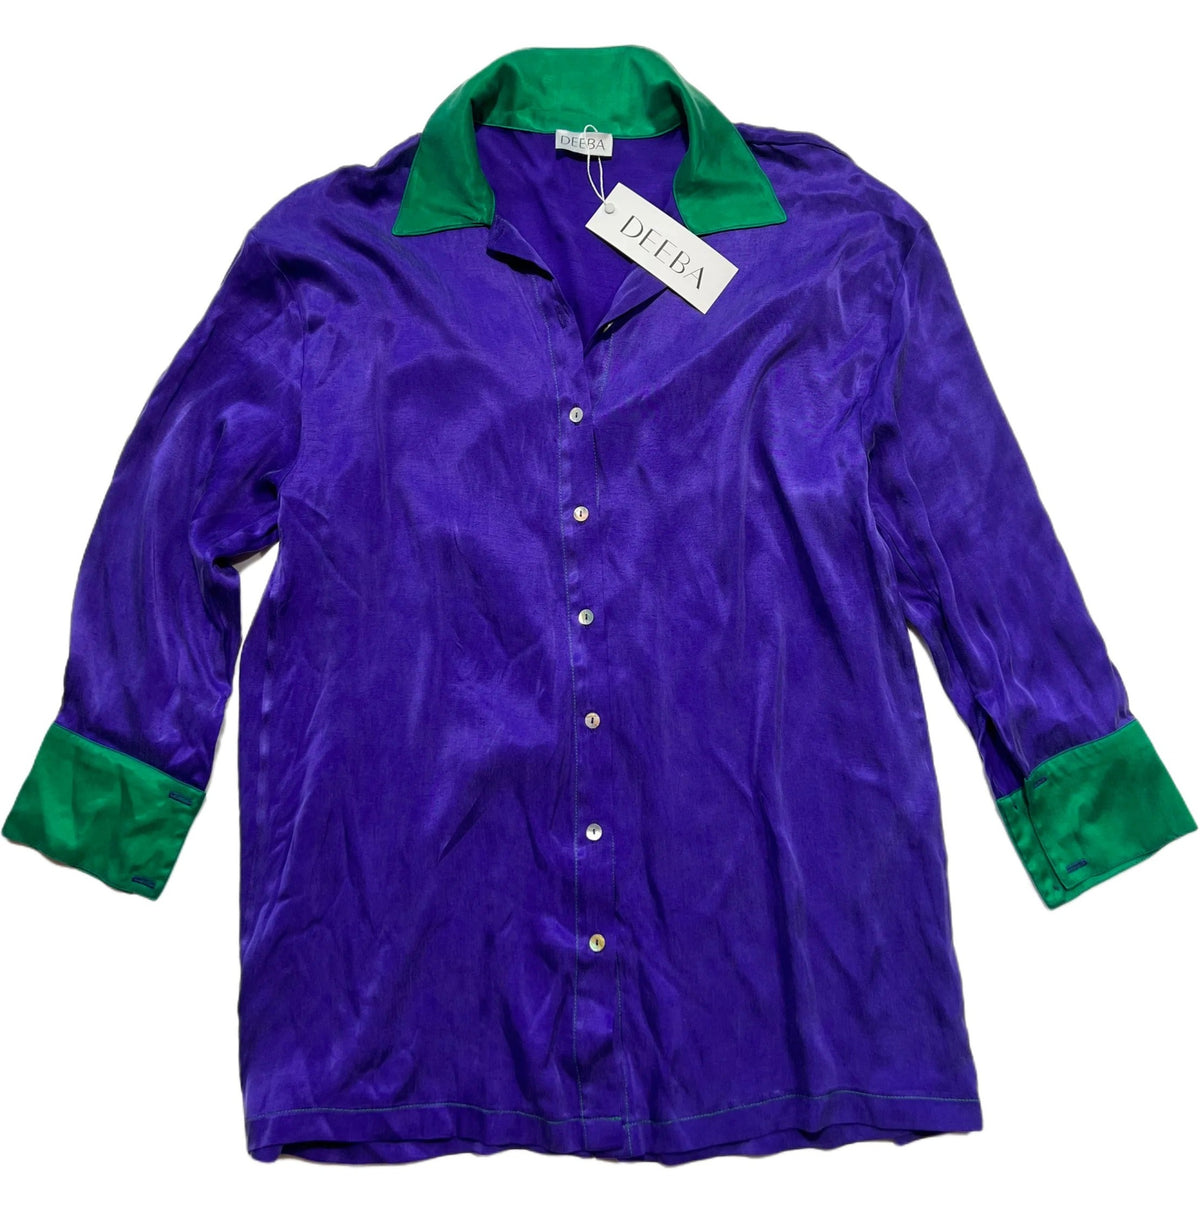 Deeba- Purple and Green Satin Button Up New With Tags!